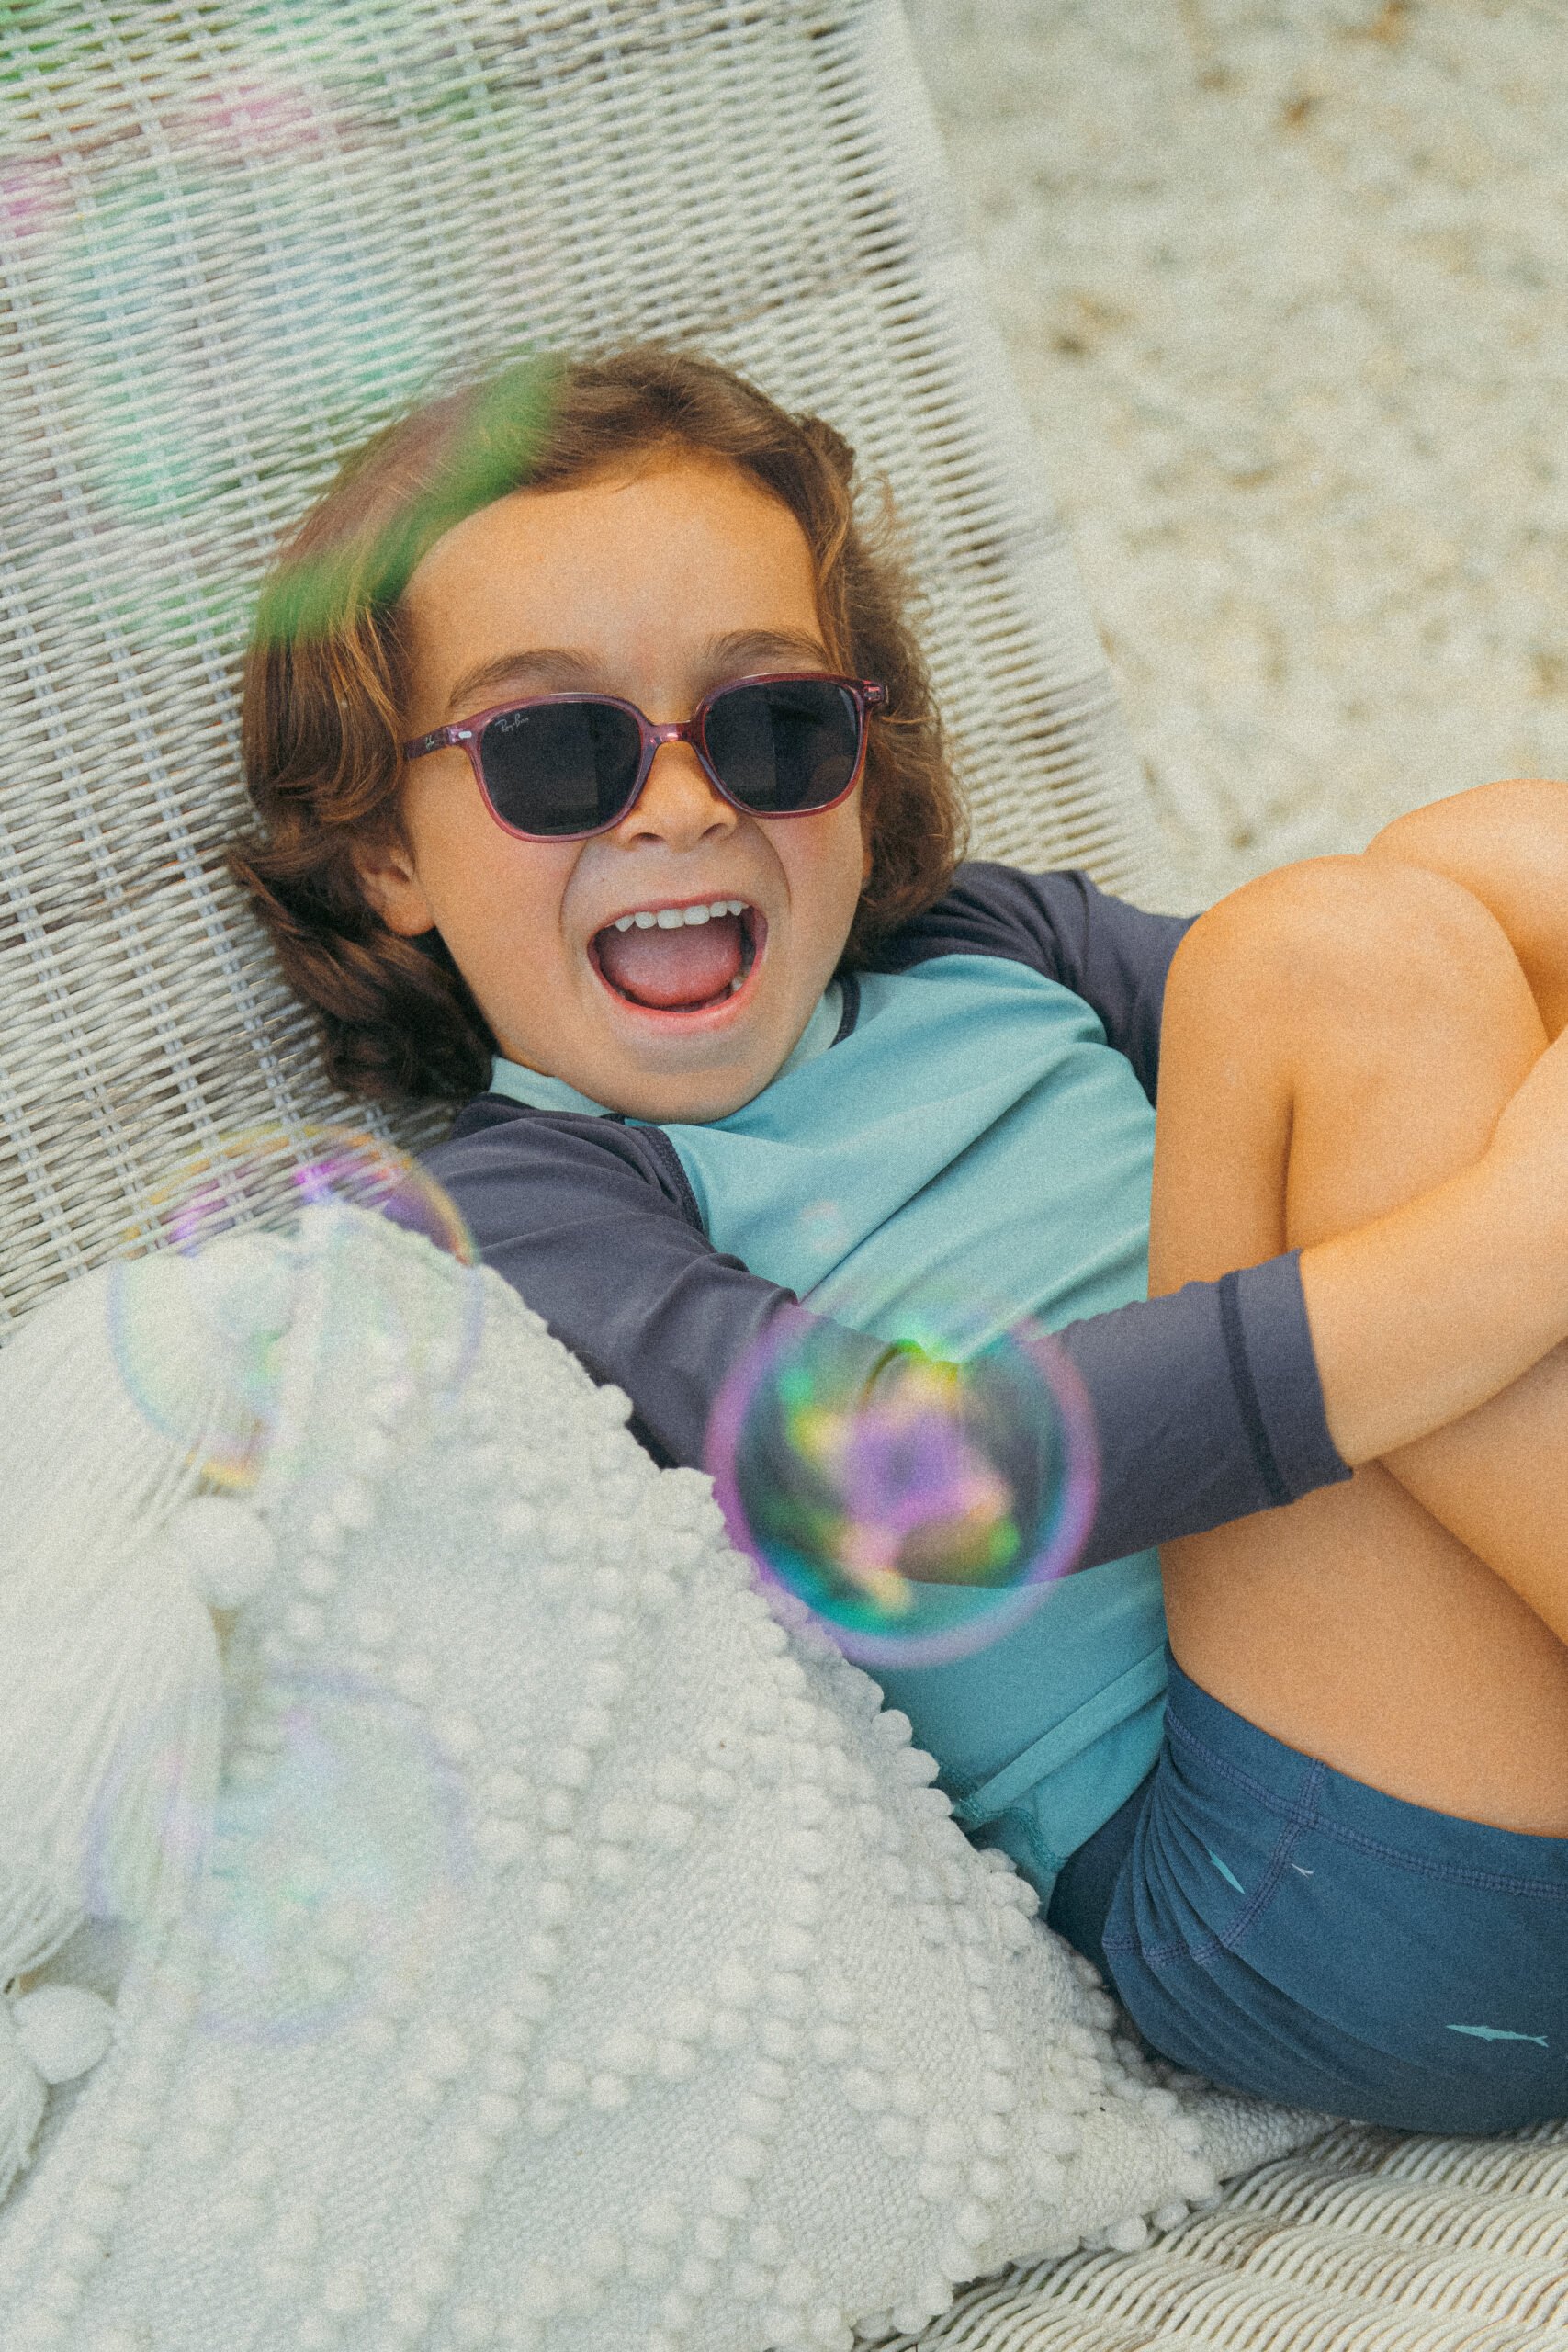 kid laughing in sunglasses